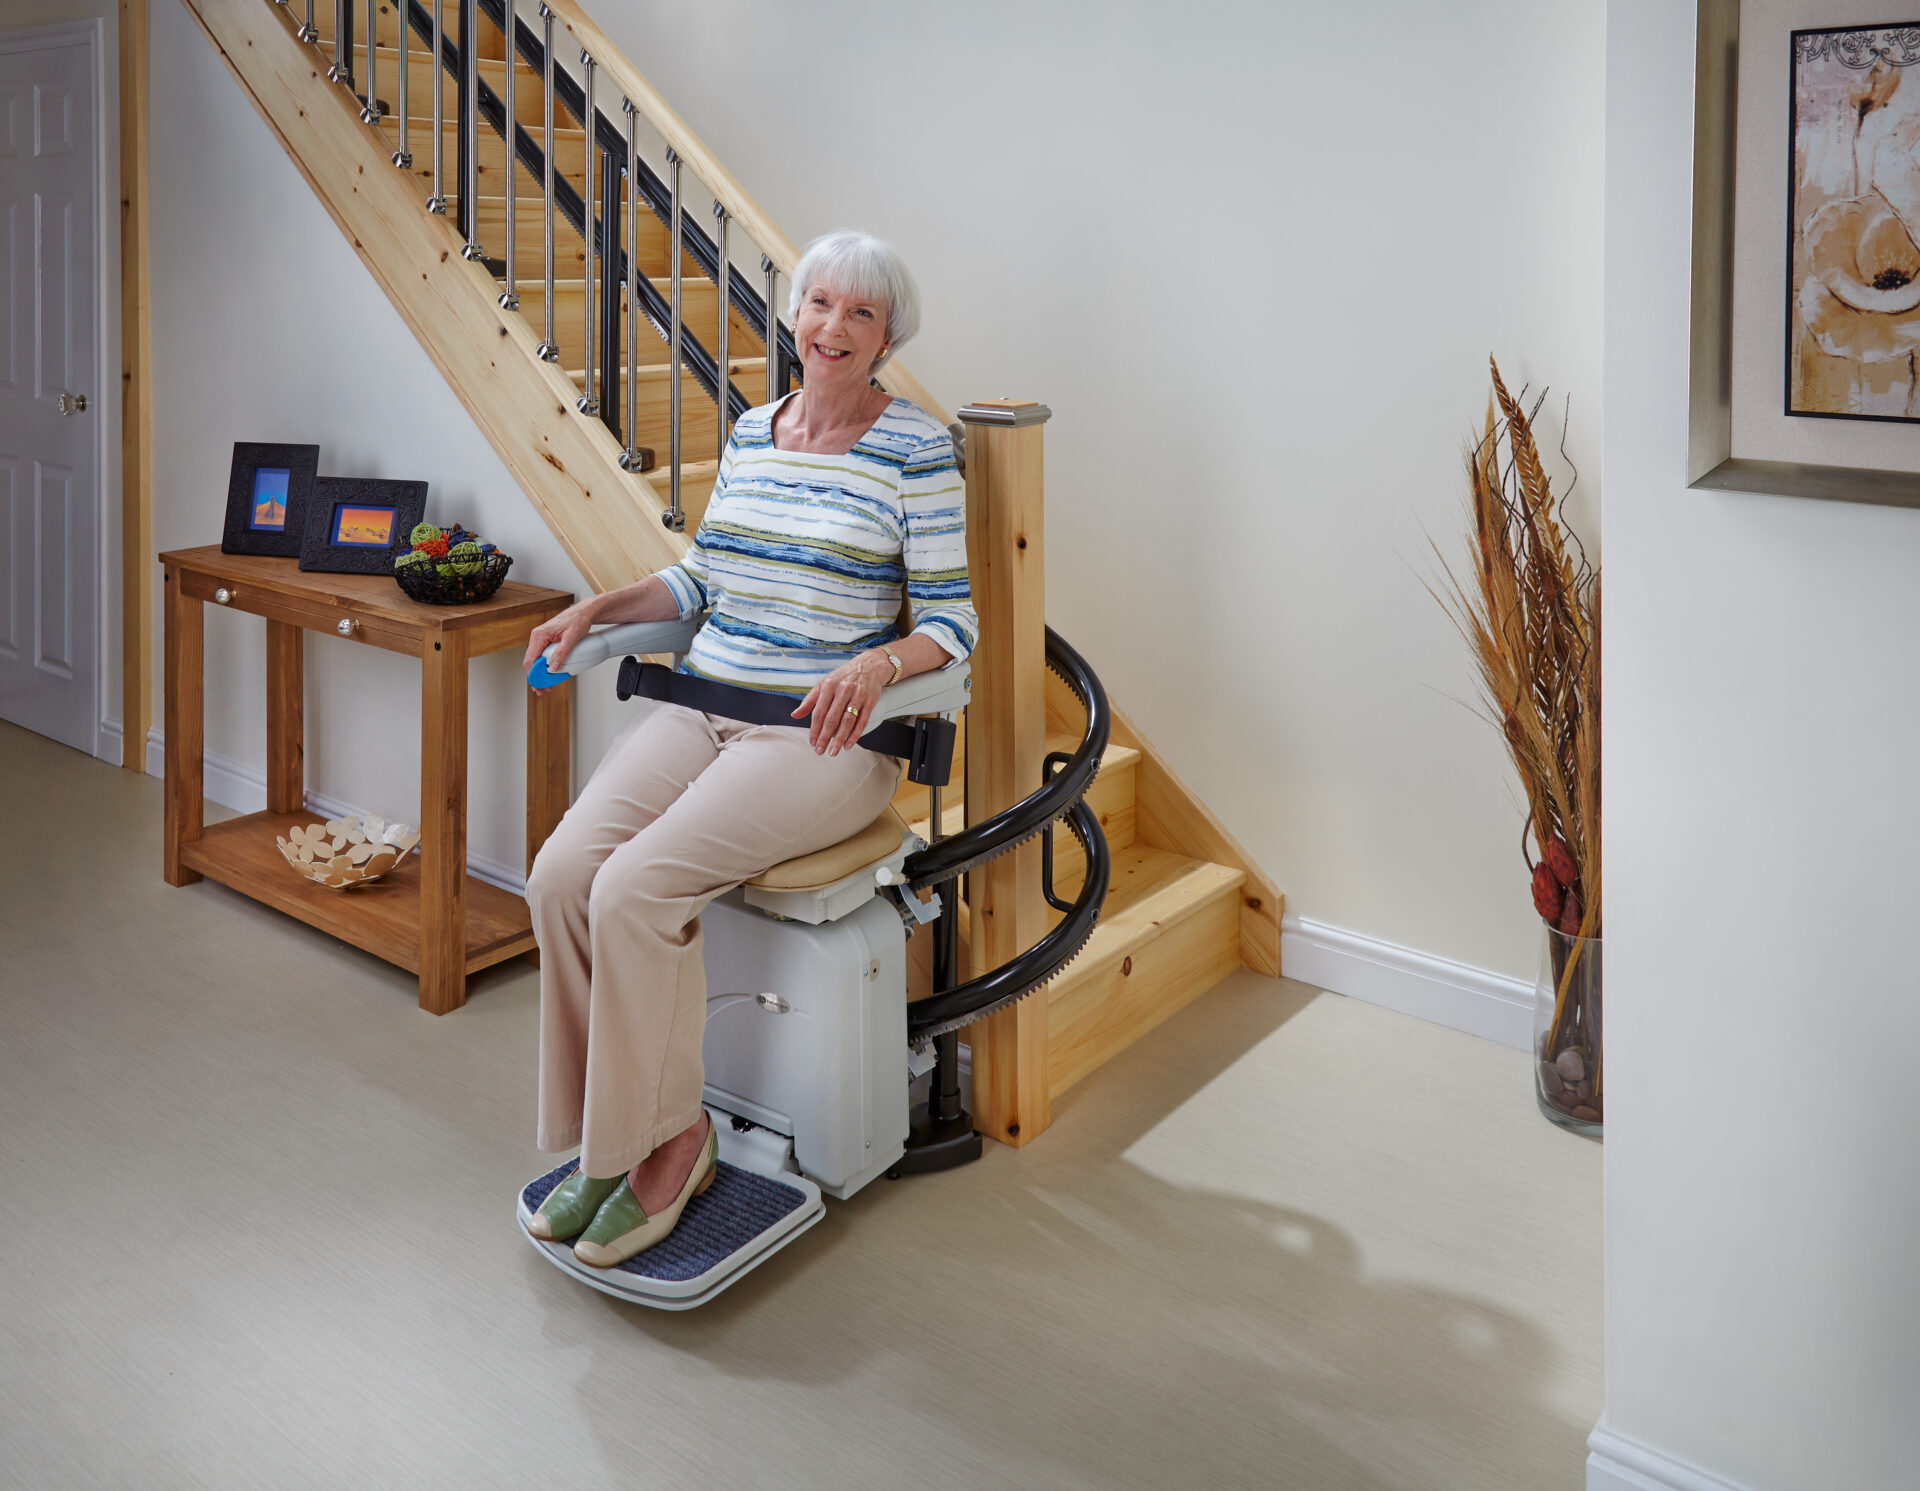 Stair Lift Or Home Elevator Choosing The Right Home Modification For